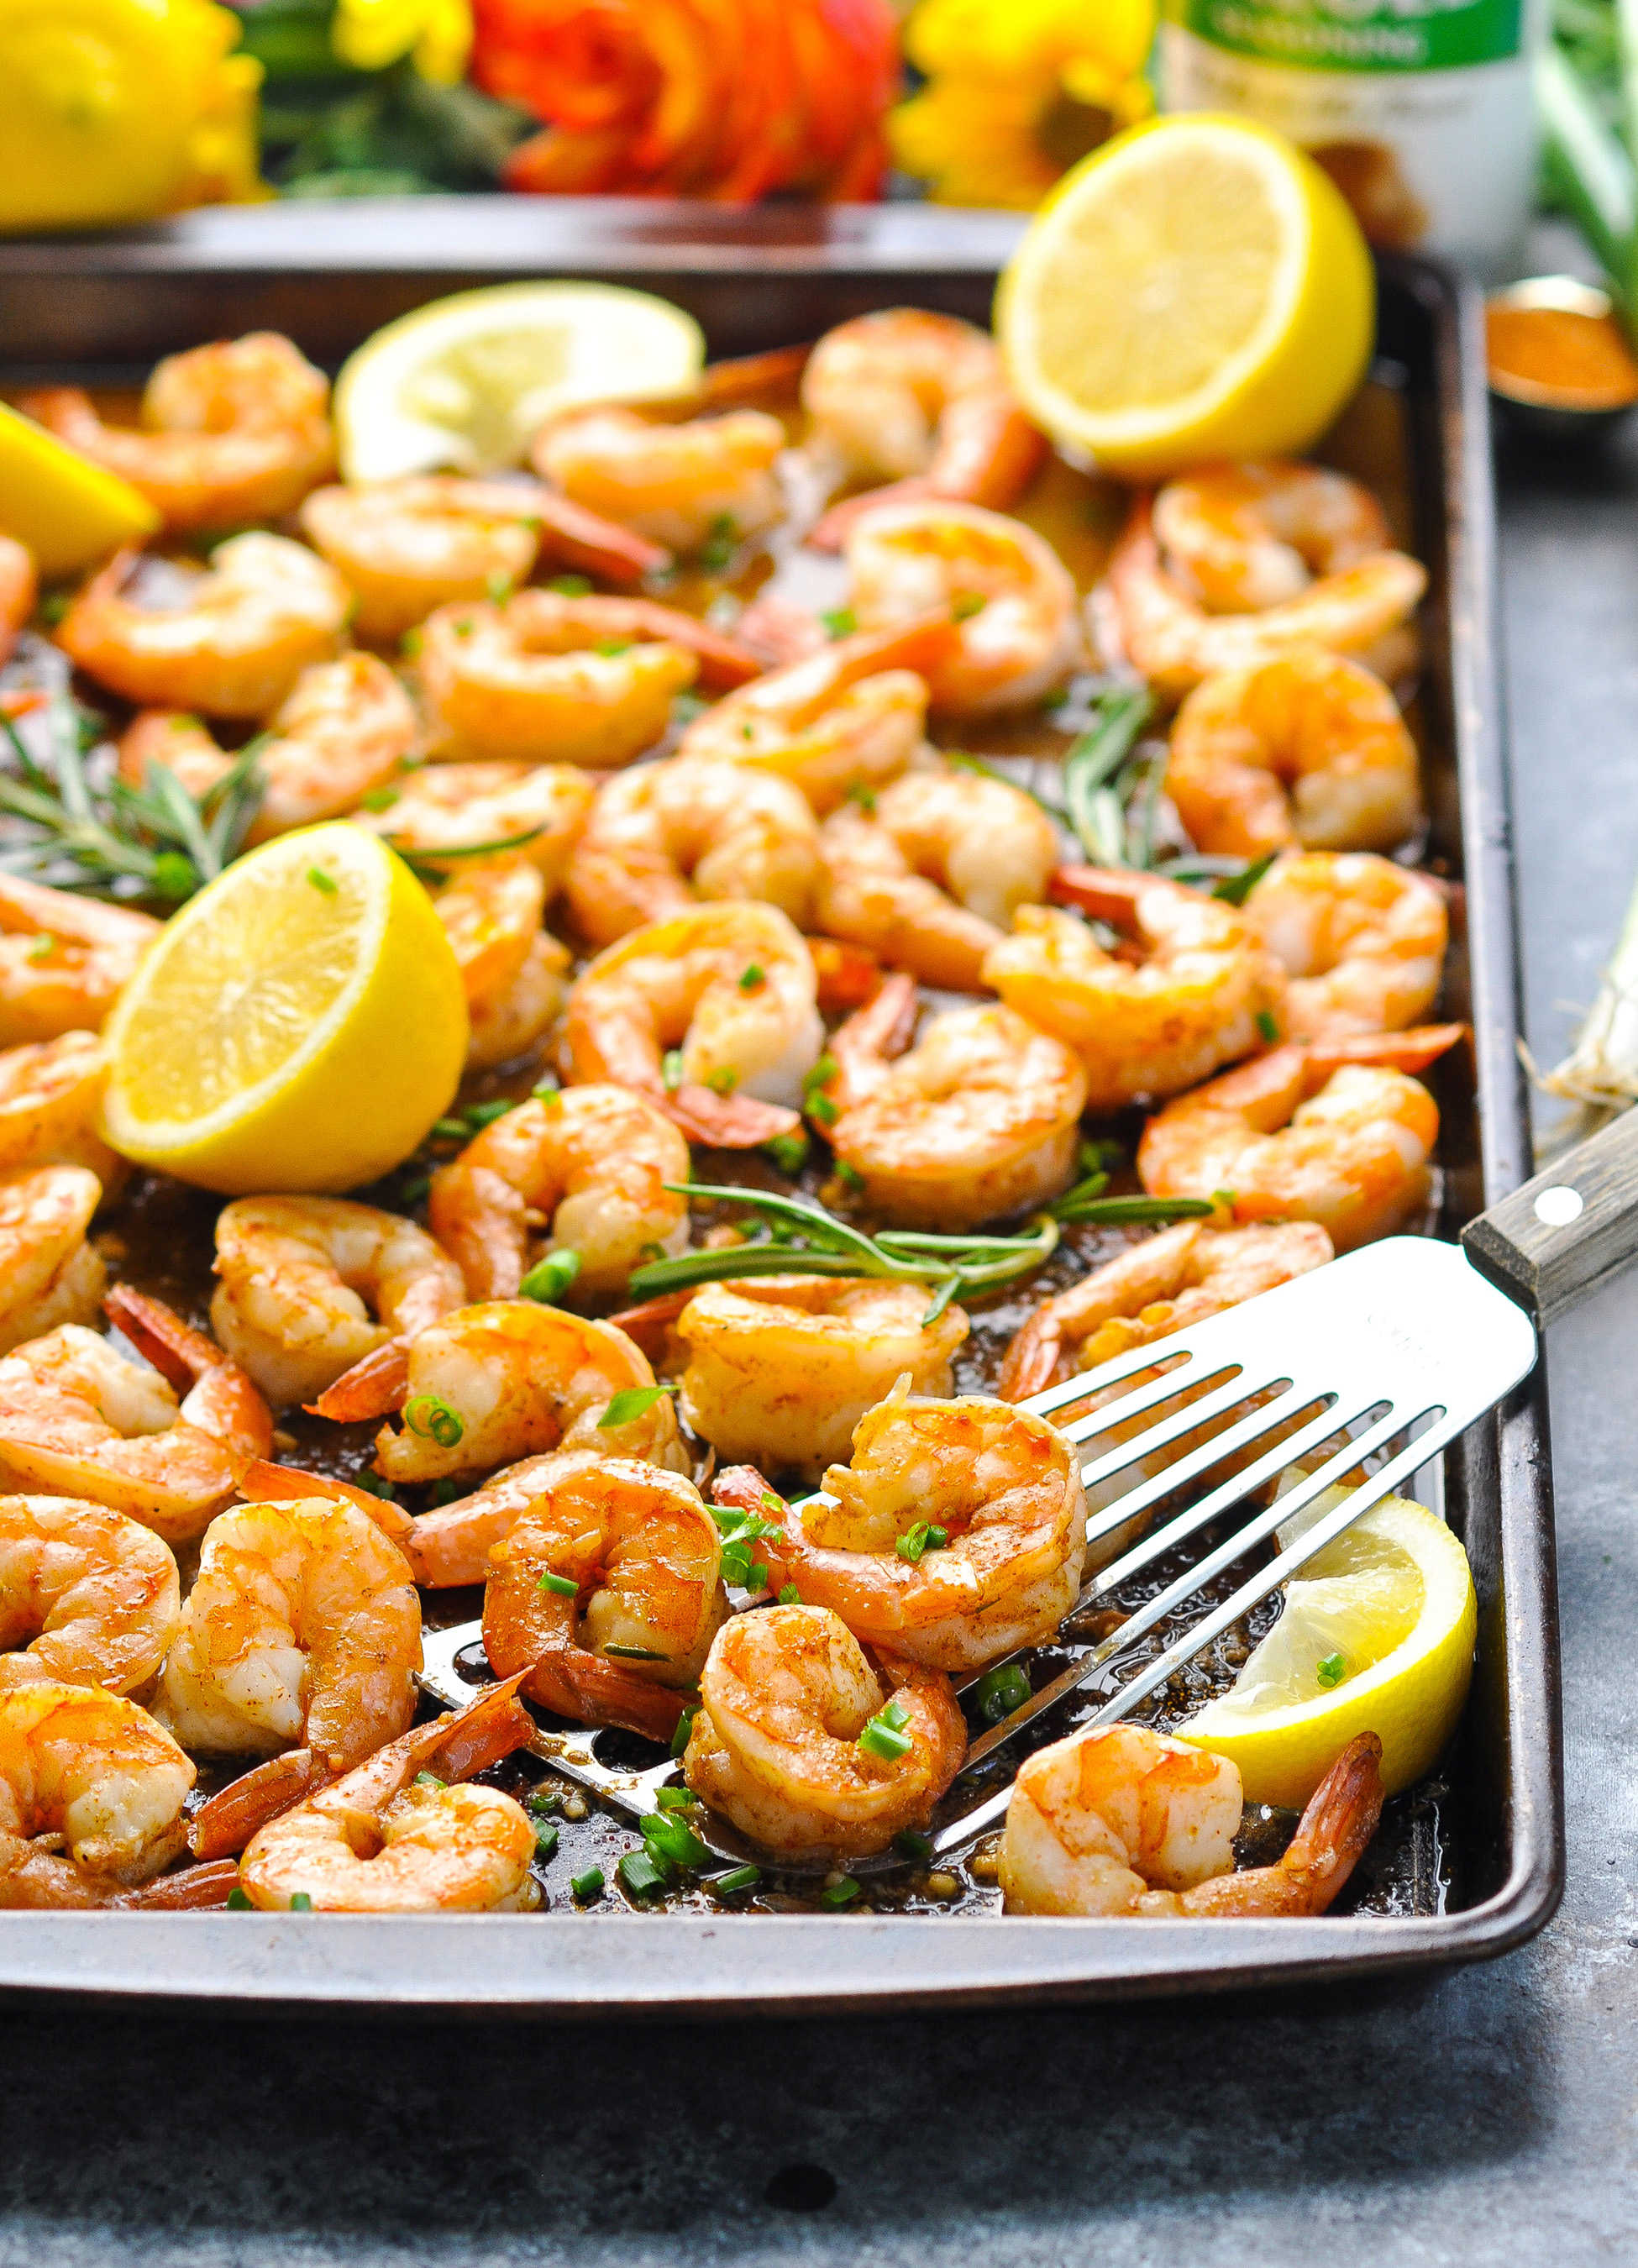 Sheet Pan New Orleans BBQ Shrimp: This easy dinner delivers maximum Southern flavor with minimum effort. The perfectly seasoned shrimp dish comes together in less than 20 minutes, and is perfect served with rice, biscuits or pasta!